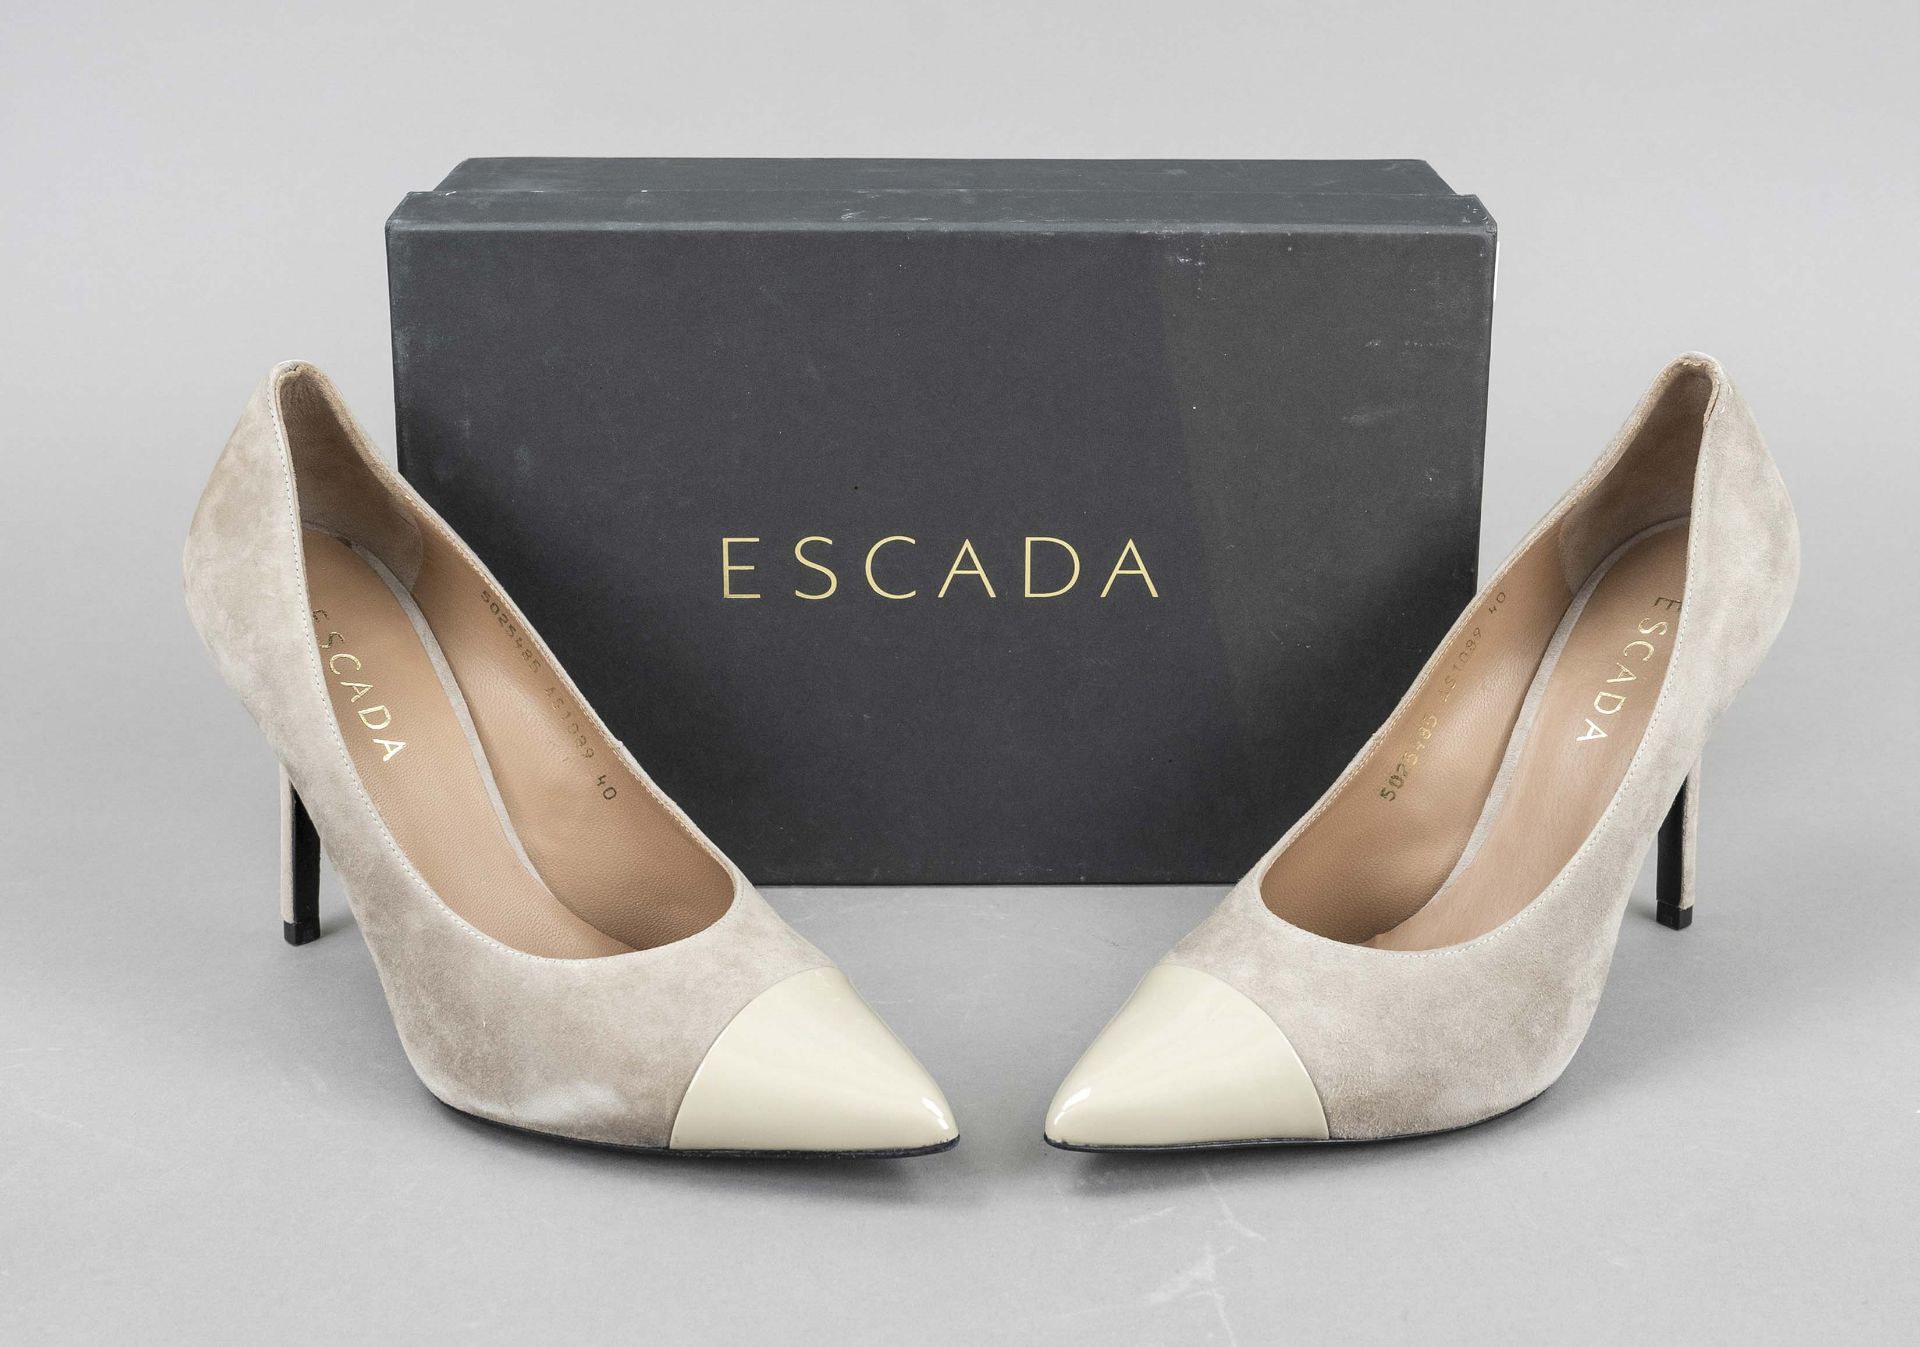 Escada, classic pumps, sand-colored suede with patent leather details, leather-covered heel, leather